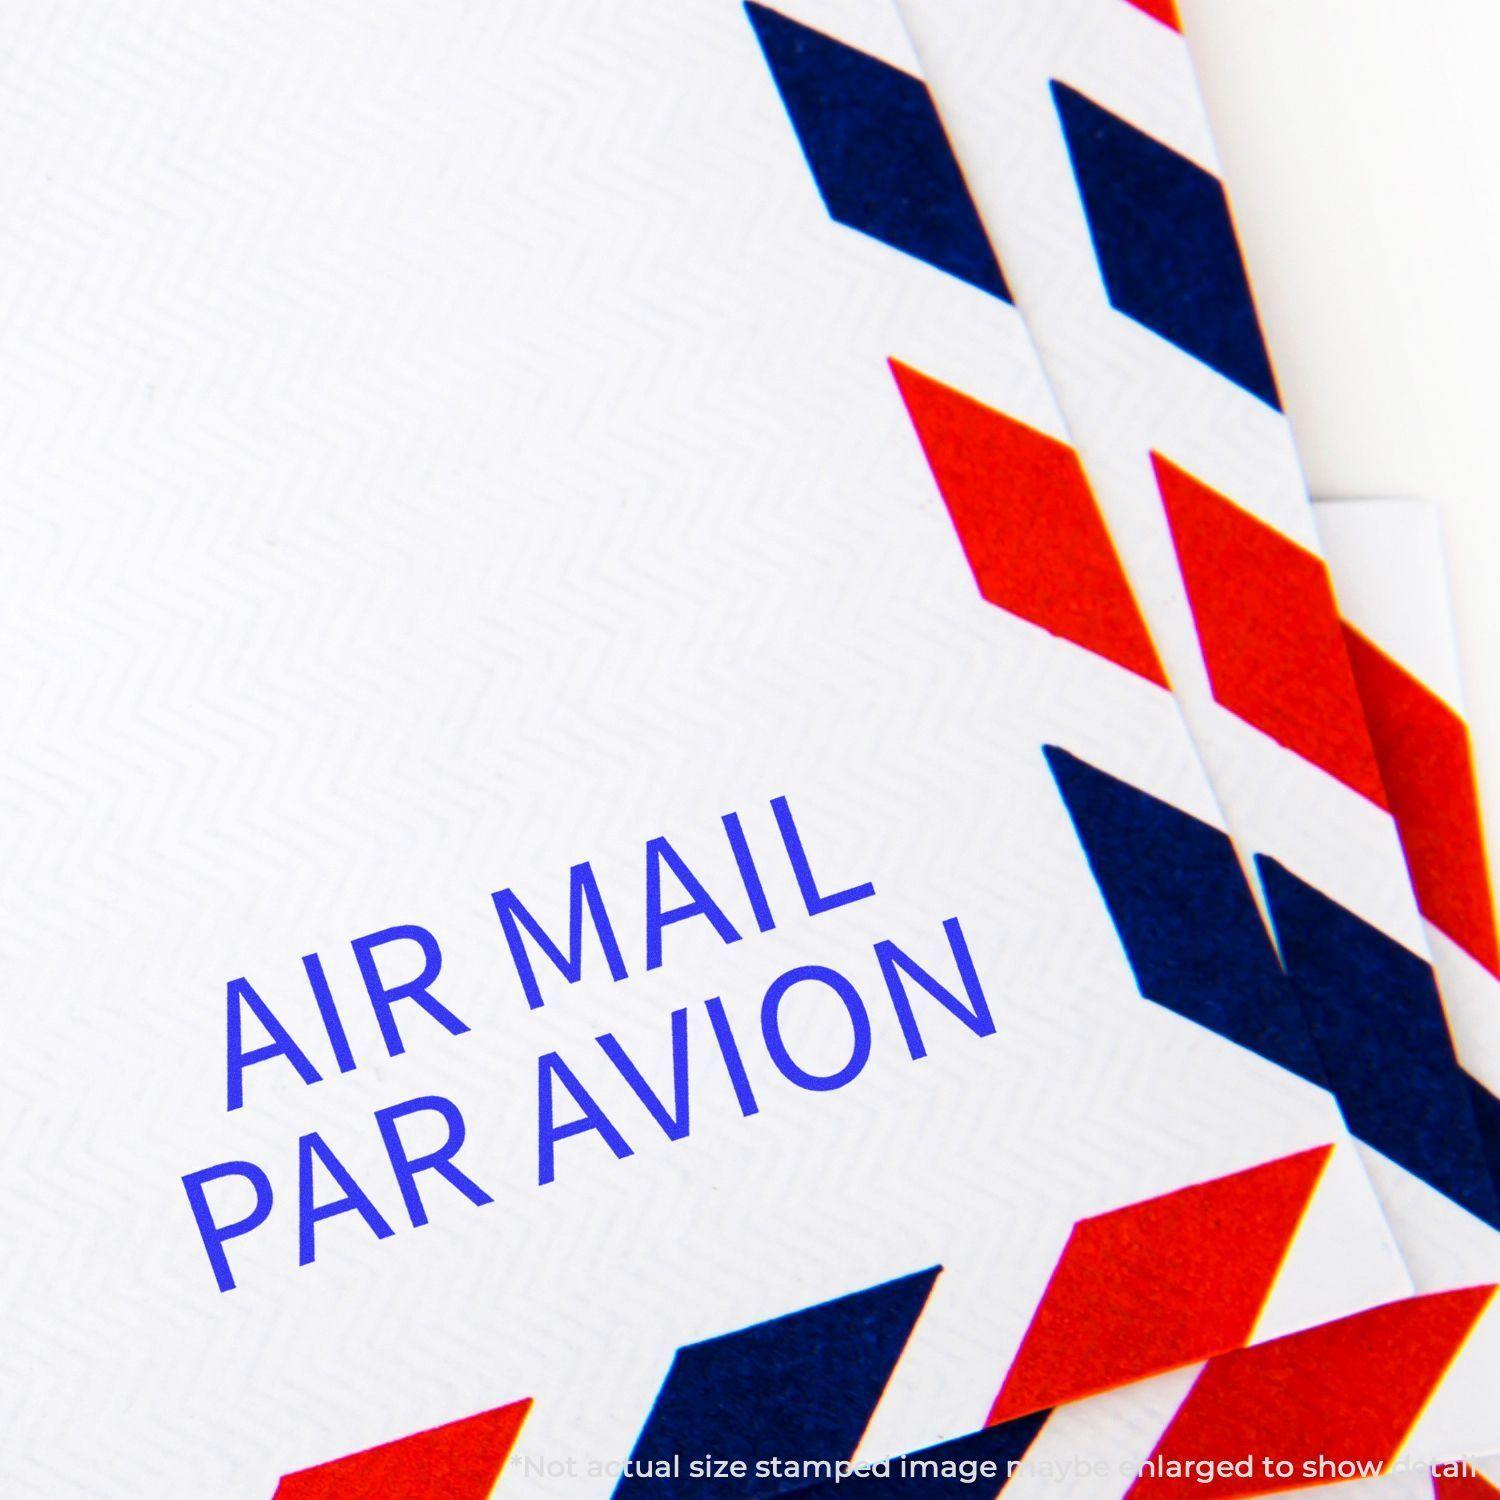 Slim Pre-Inked Air Mail Par Avion Stamp - Engineer Seal Stamps - Brand_Slim, Impression Size_Small, Stamp Type_Pre-Inked Stamp, Type of Use_Postal & Mailing, Type of Use_Shipping & Receiving